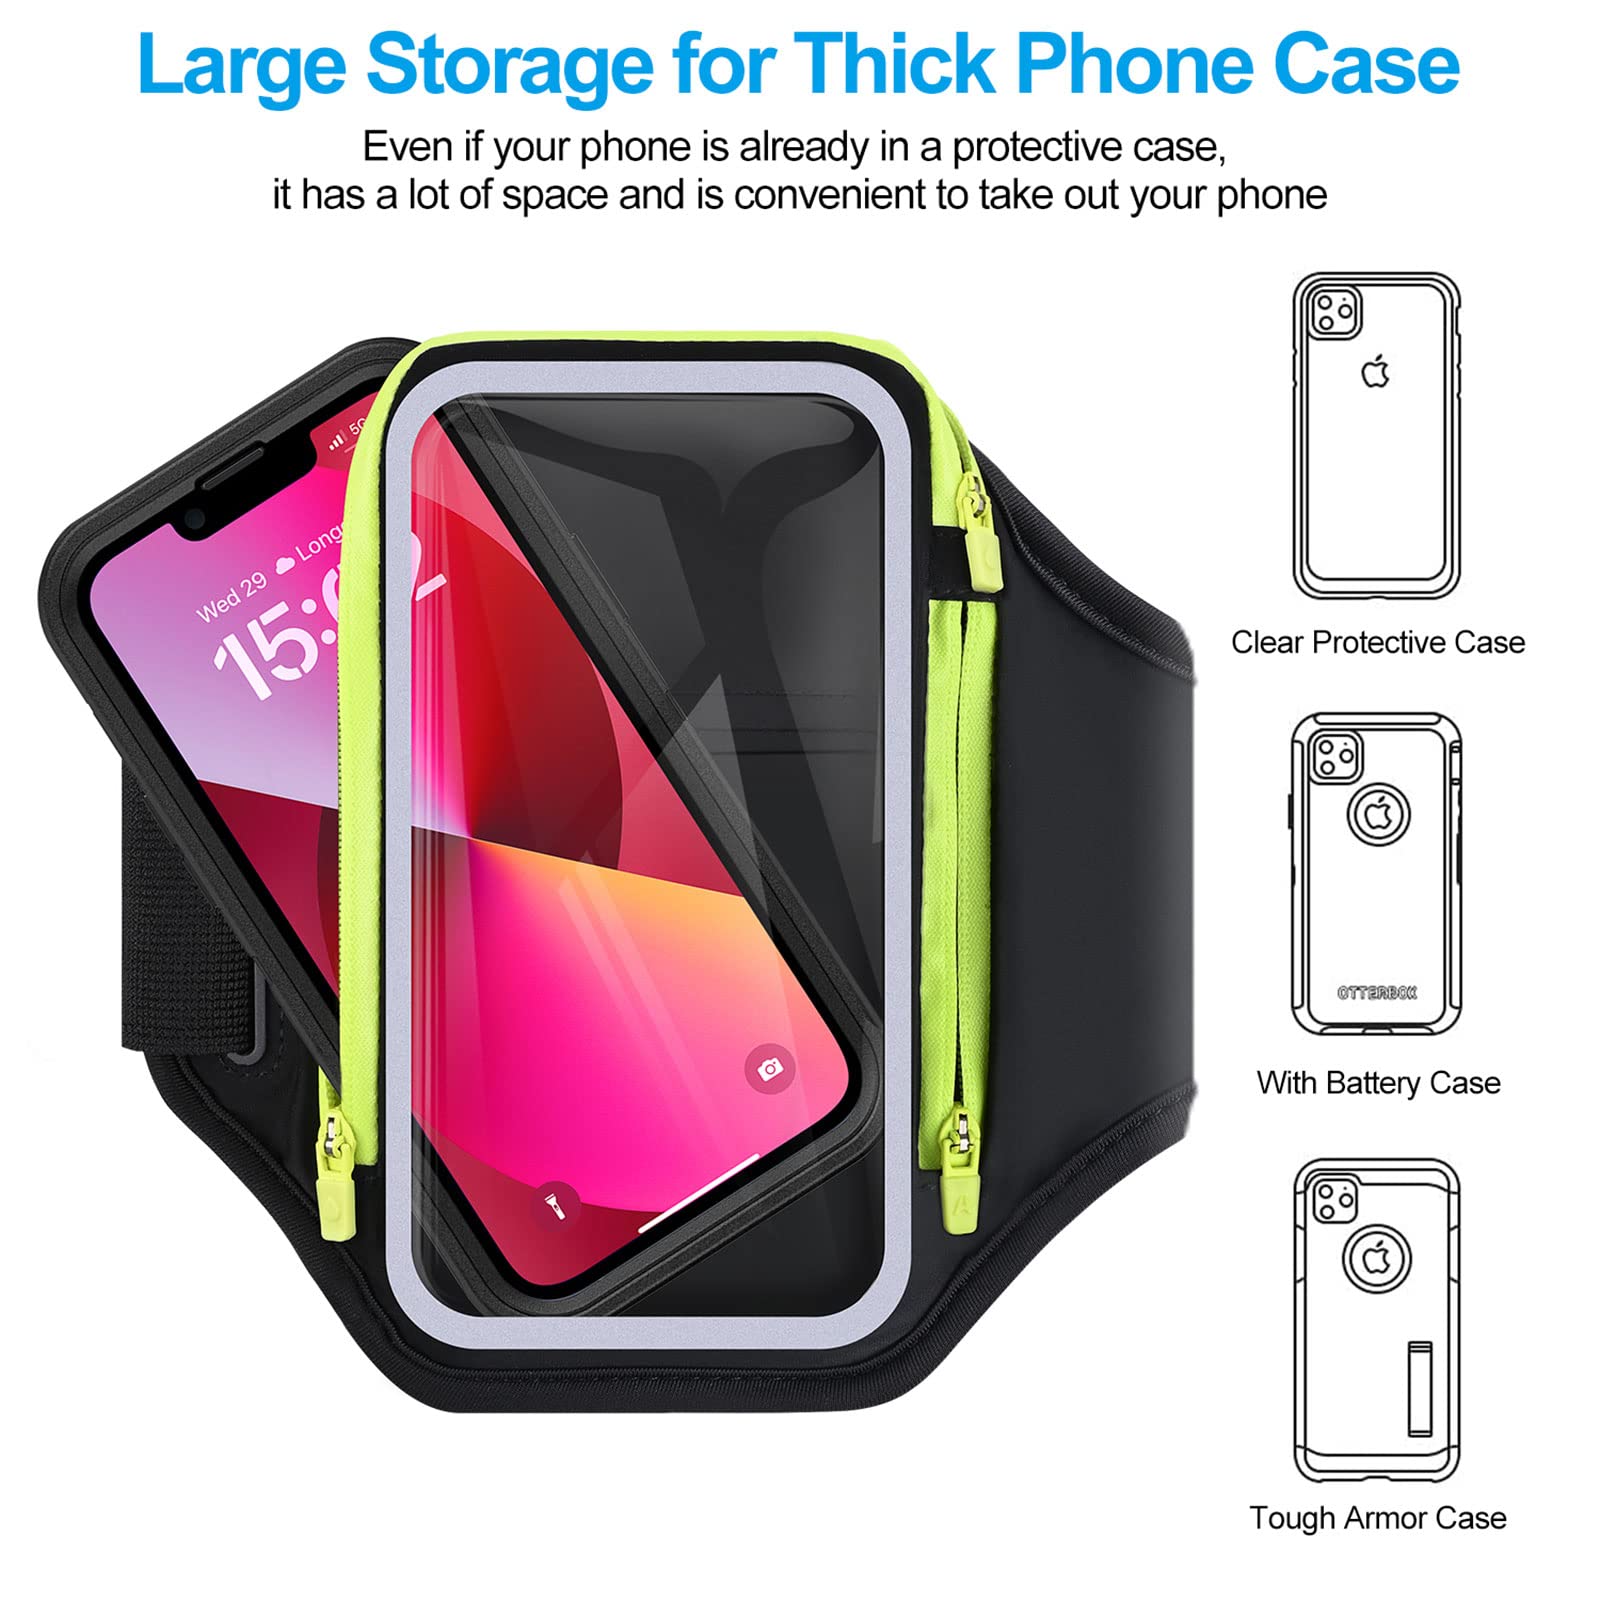 6.8'' Arm Band for Phone for Running, Running Gear Essentials for Thick Phone Case, Running Phone Holder Armband Bag for iPhone 15 14 13 12 11 Pro Max Galaxy with Car Home Key Zipper Earphone Pocket